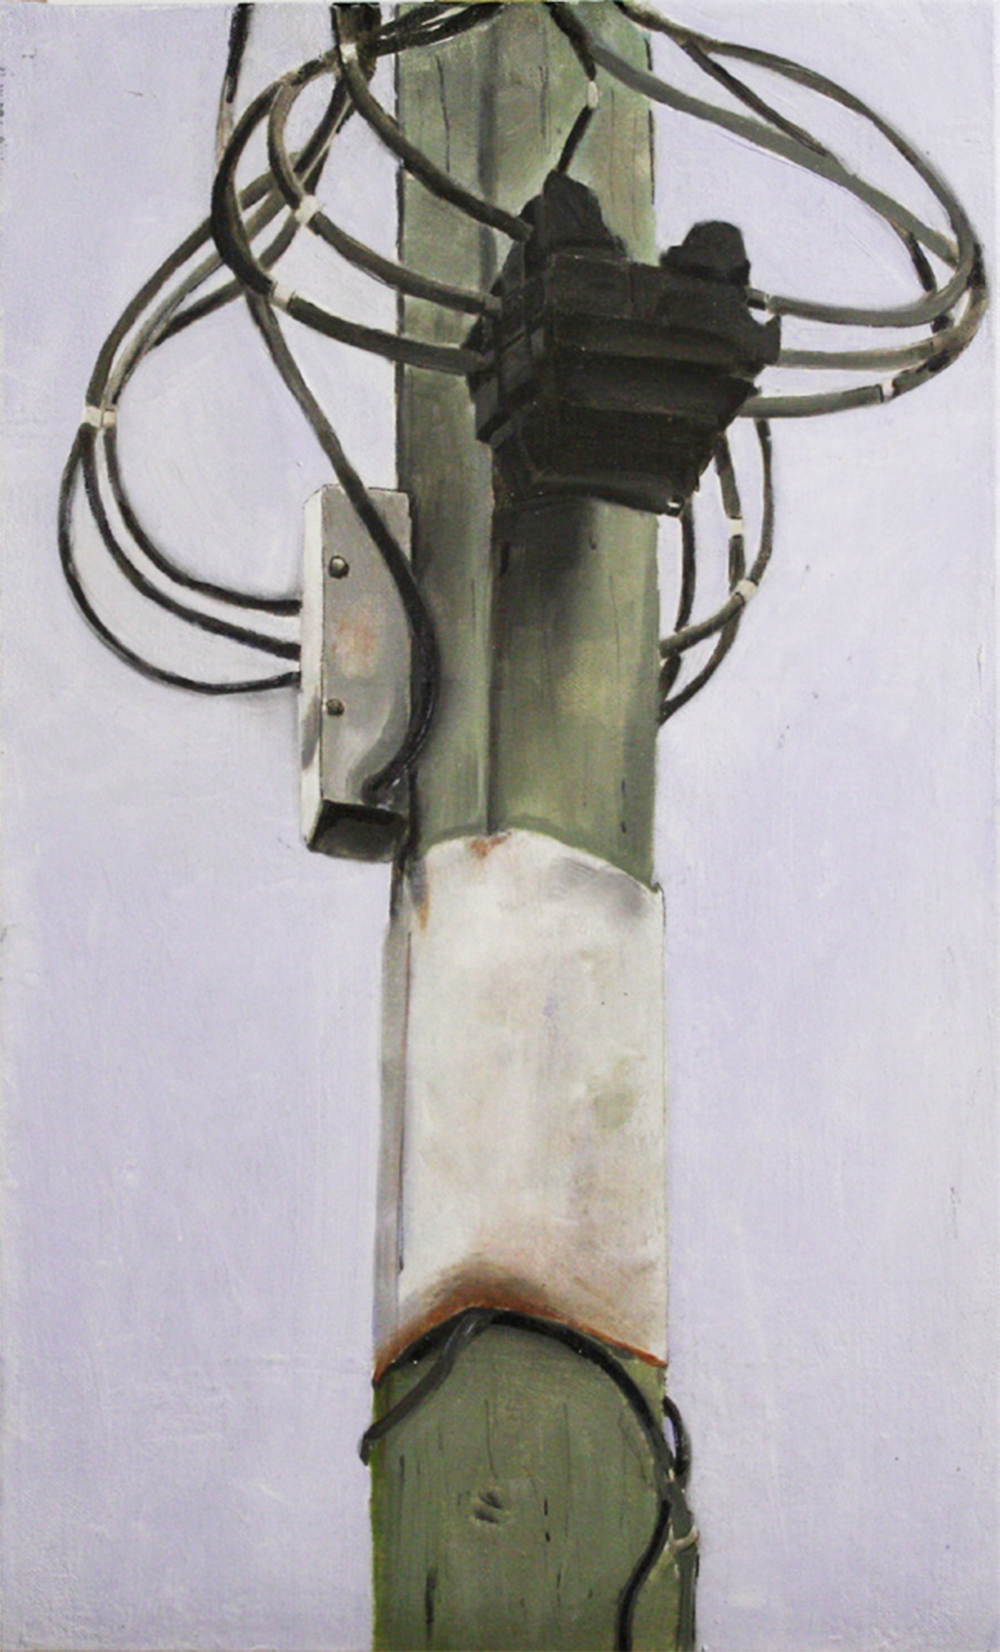  Stand Alone:  23782   2011, oil on canvas on hardboard  50 x 76 cm  private collection           